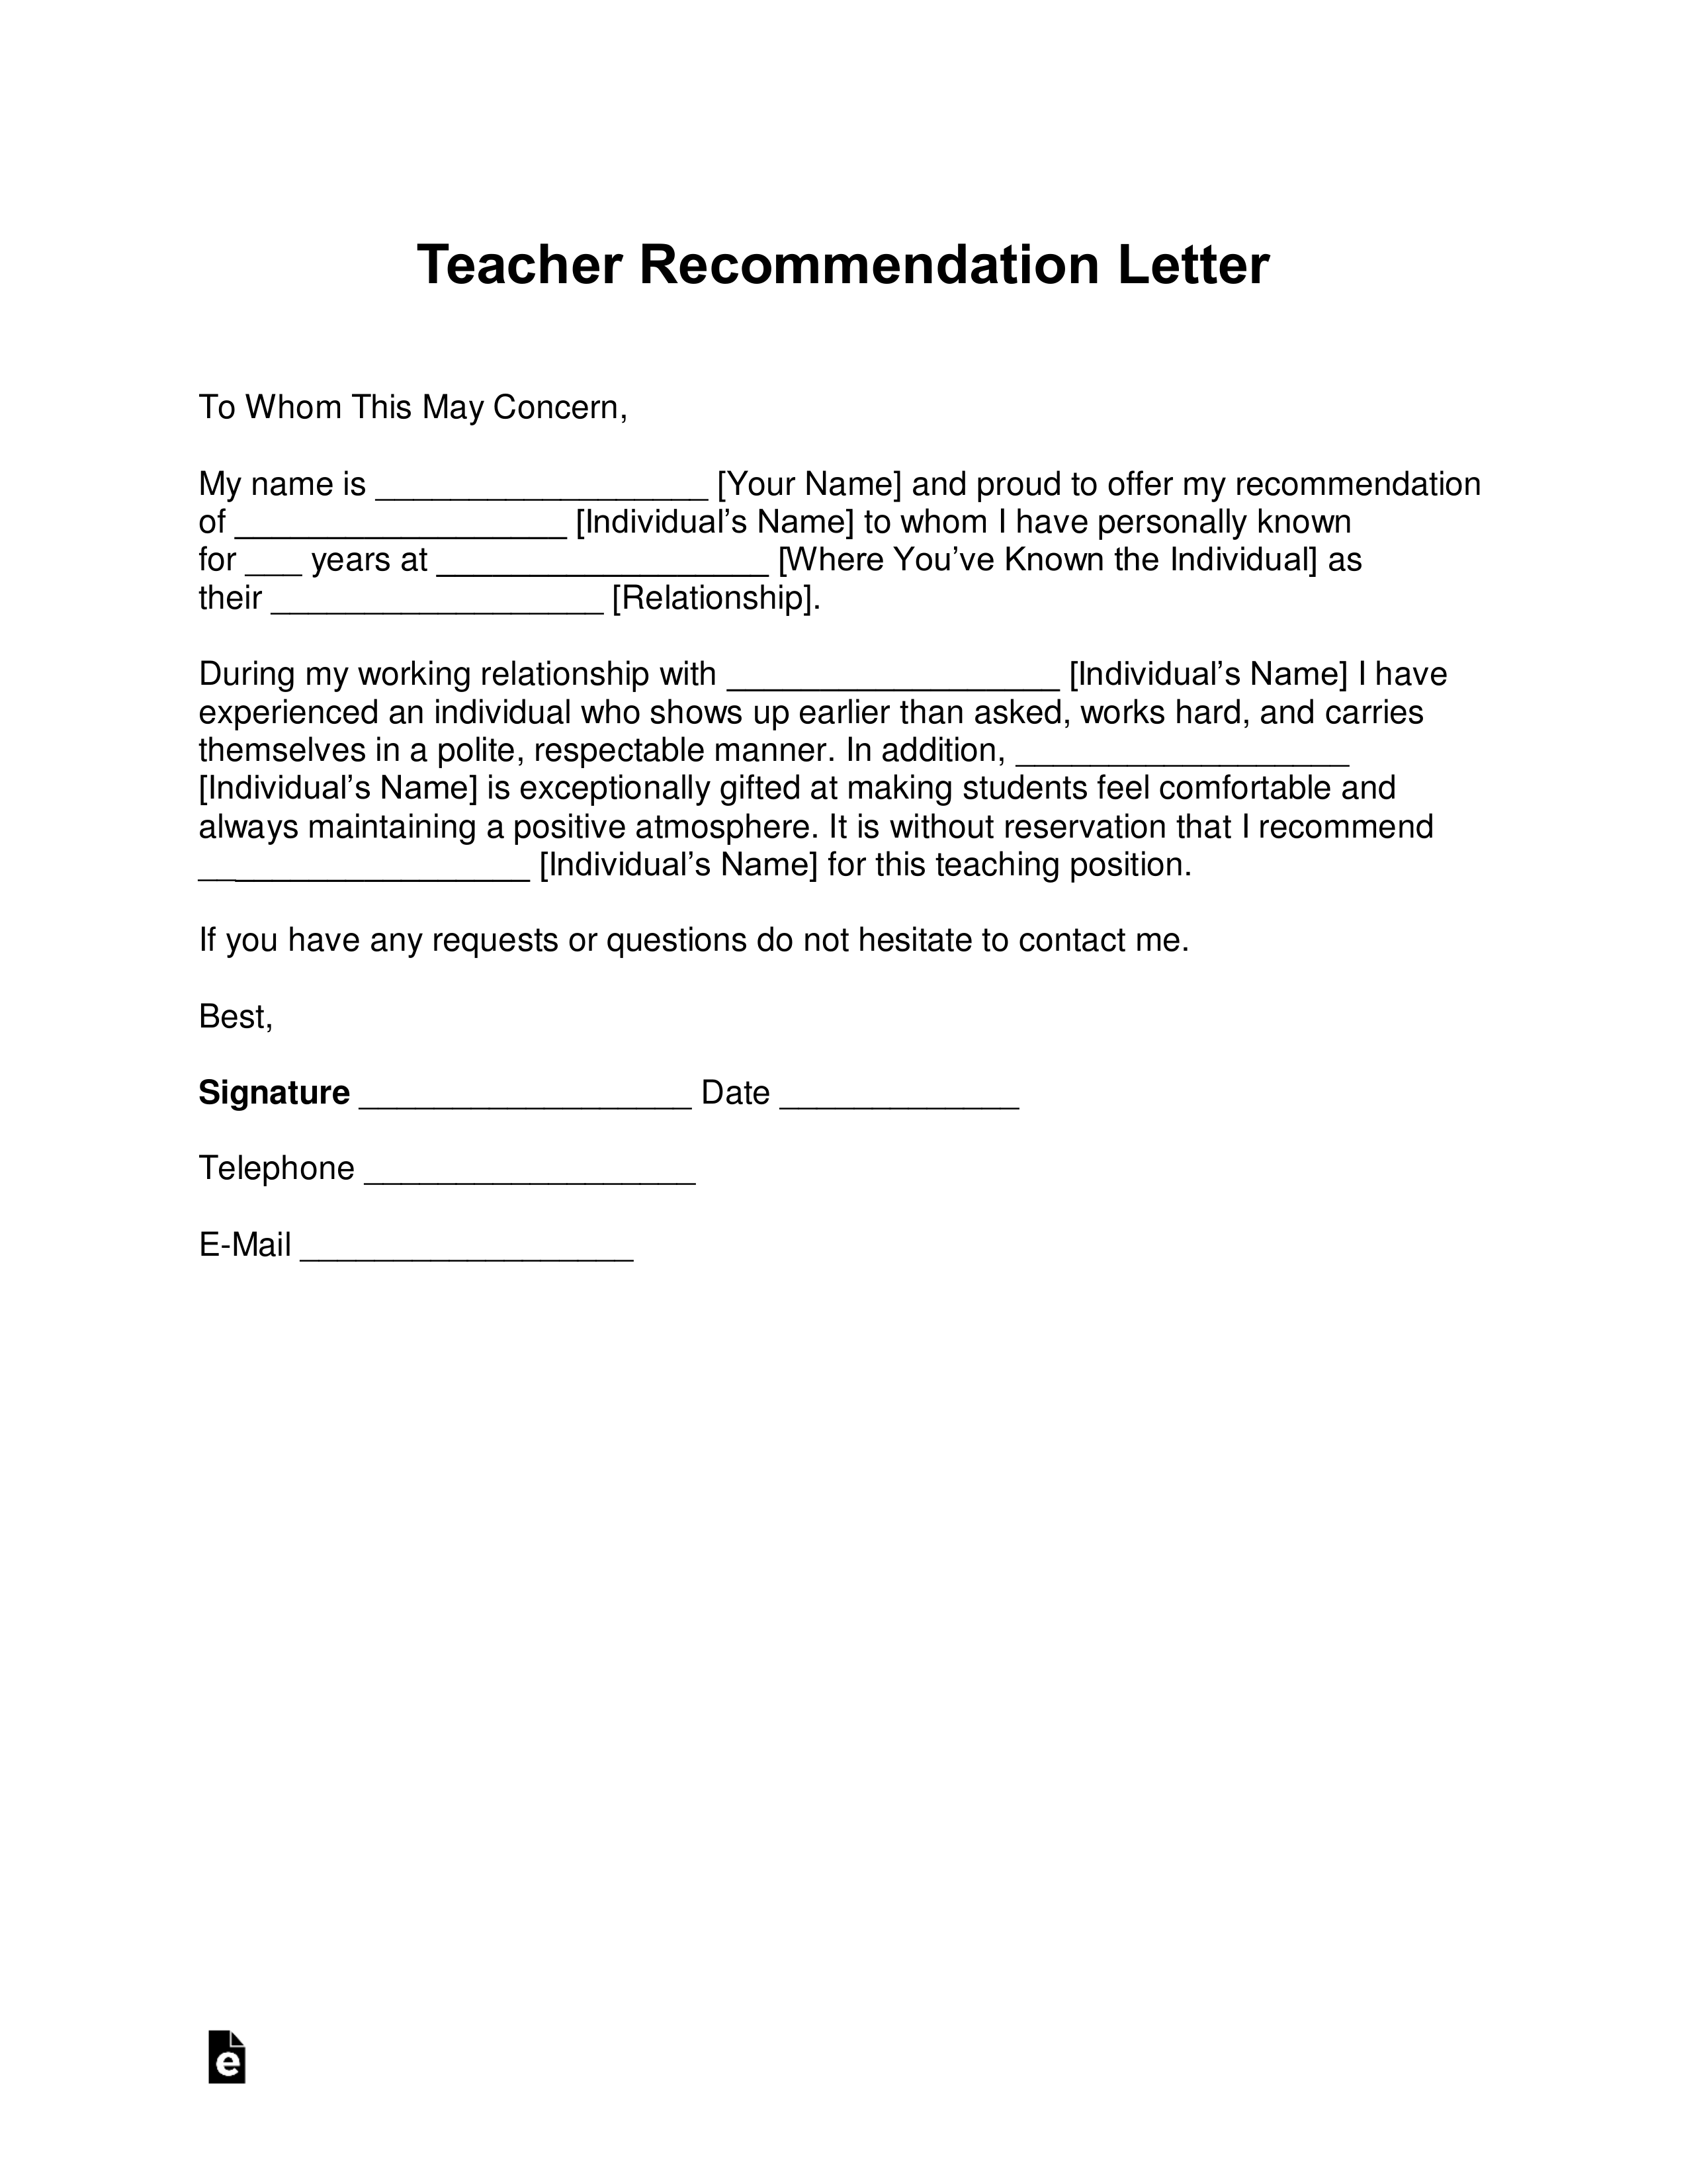 Student Letter Of Recommendation From Teacher from eforms.com